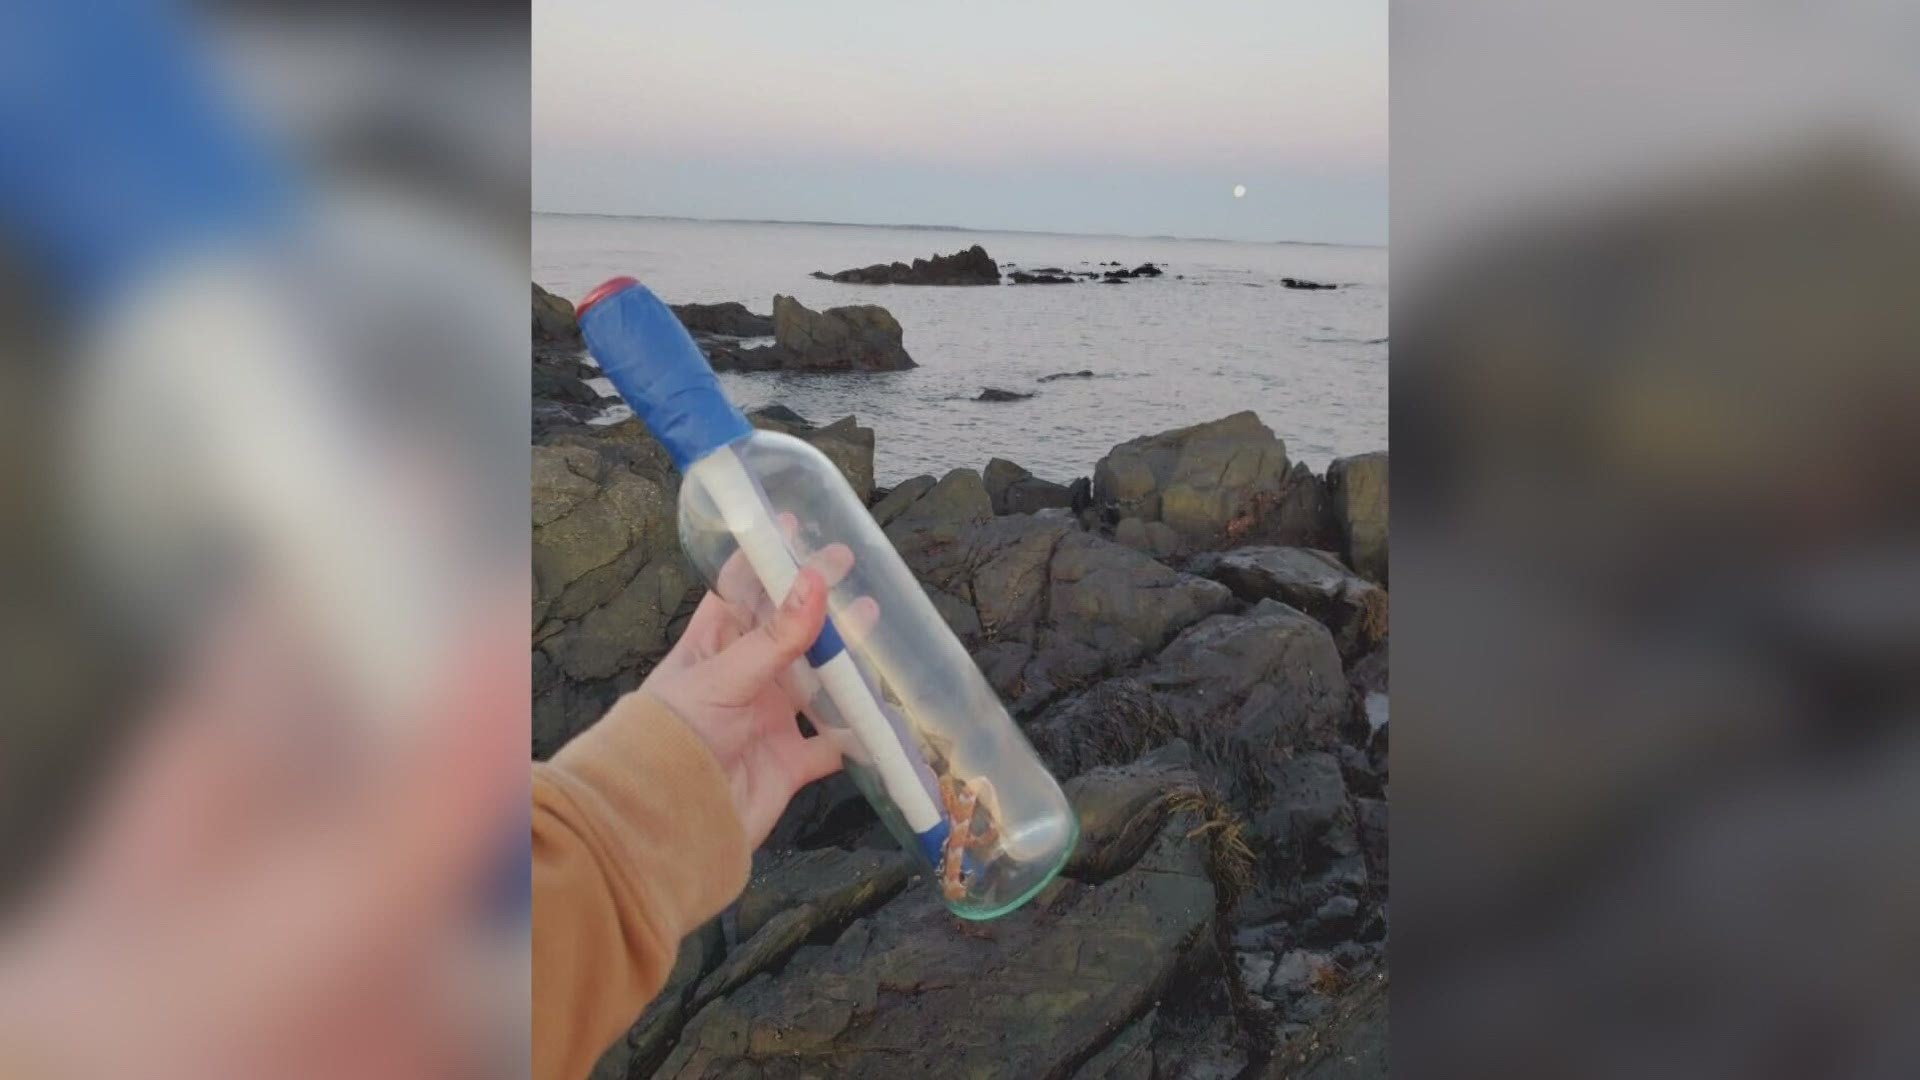 A Windham resident decided to spread some friendliness via message in a bottle. While the bottle didn't get very far, the message it brought was an important one.